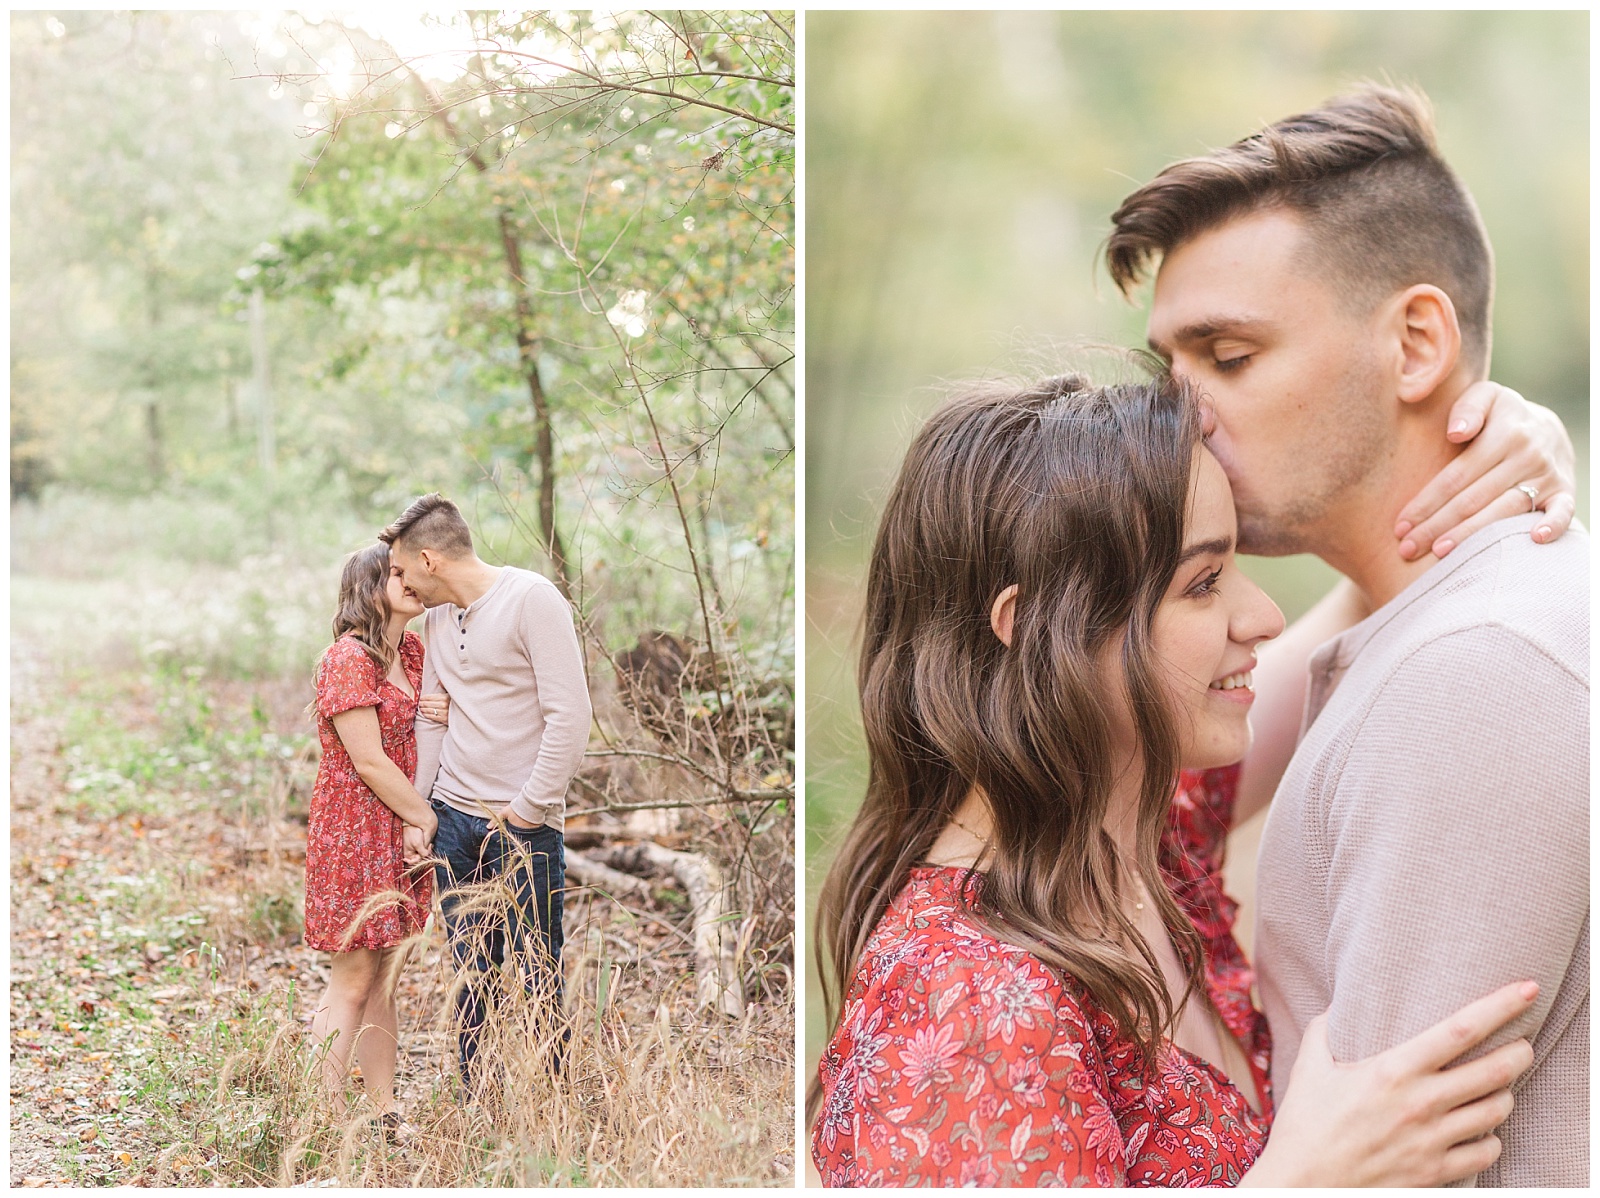 Cooper's Rock Engagement Session